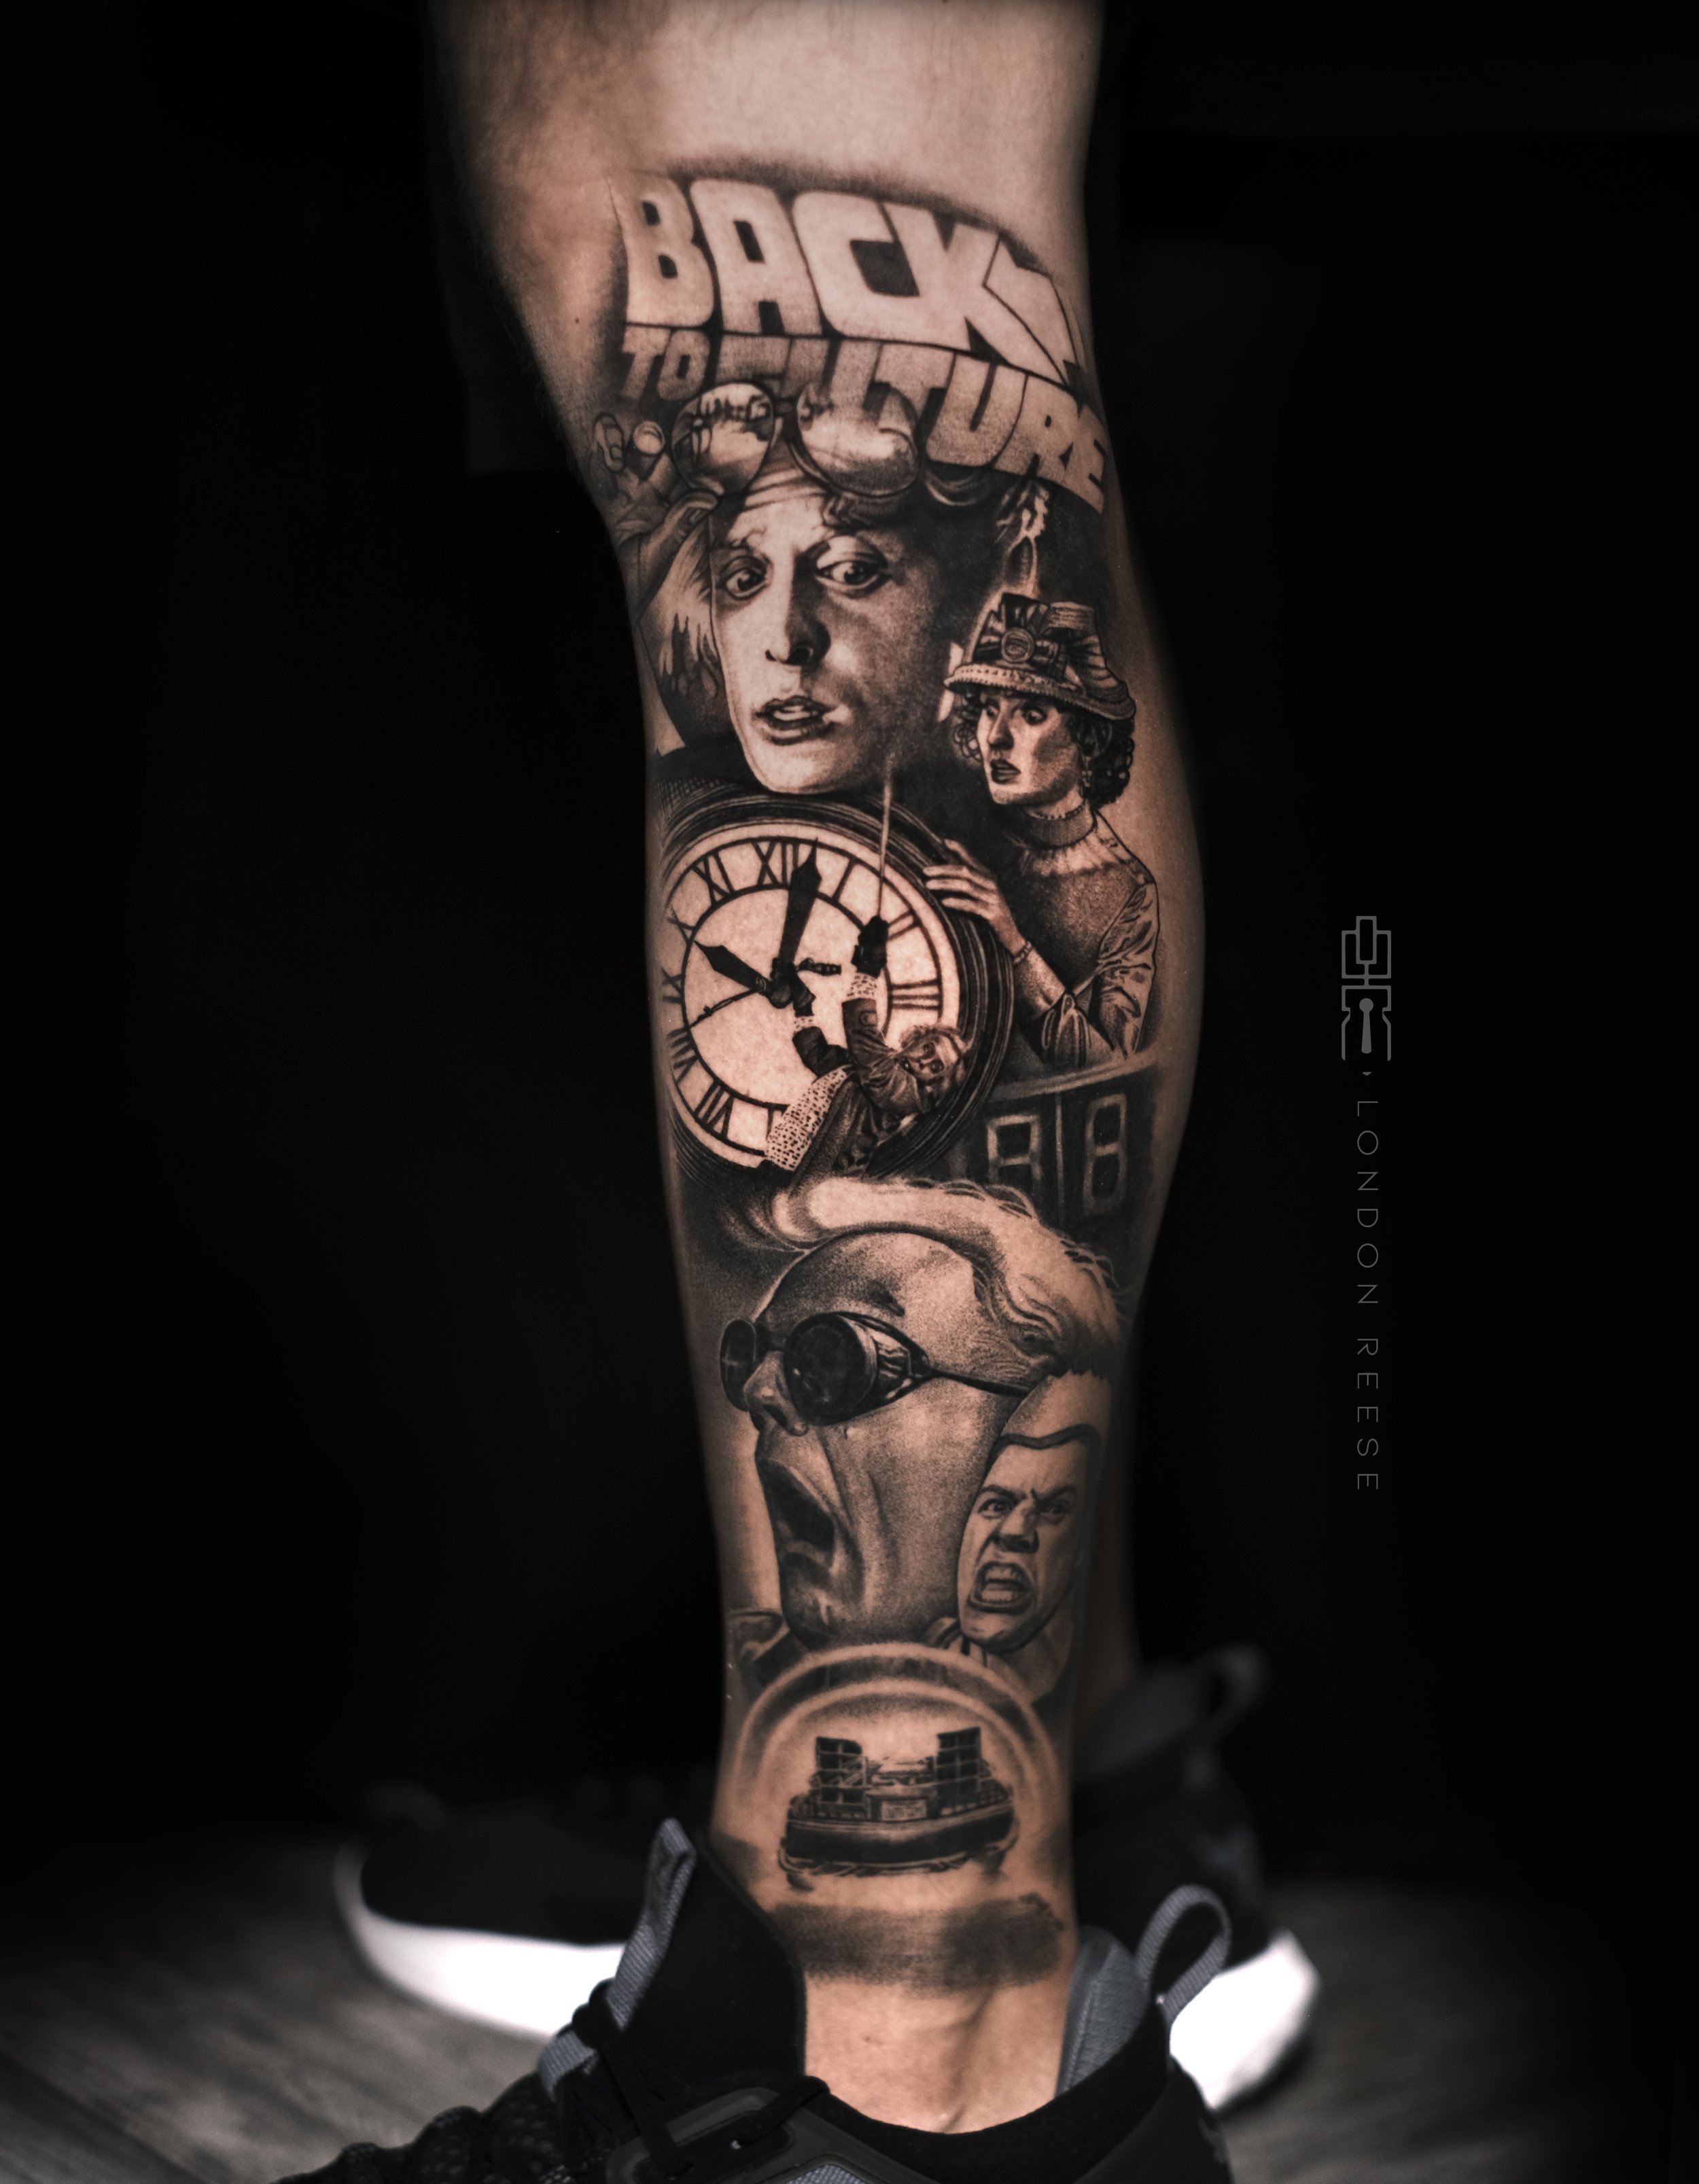 back to the future black and grey tattoo.jpg